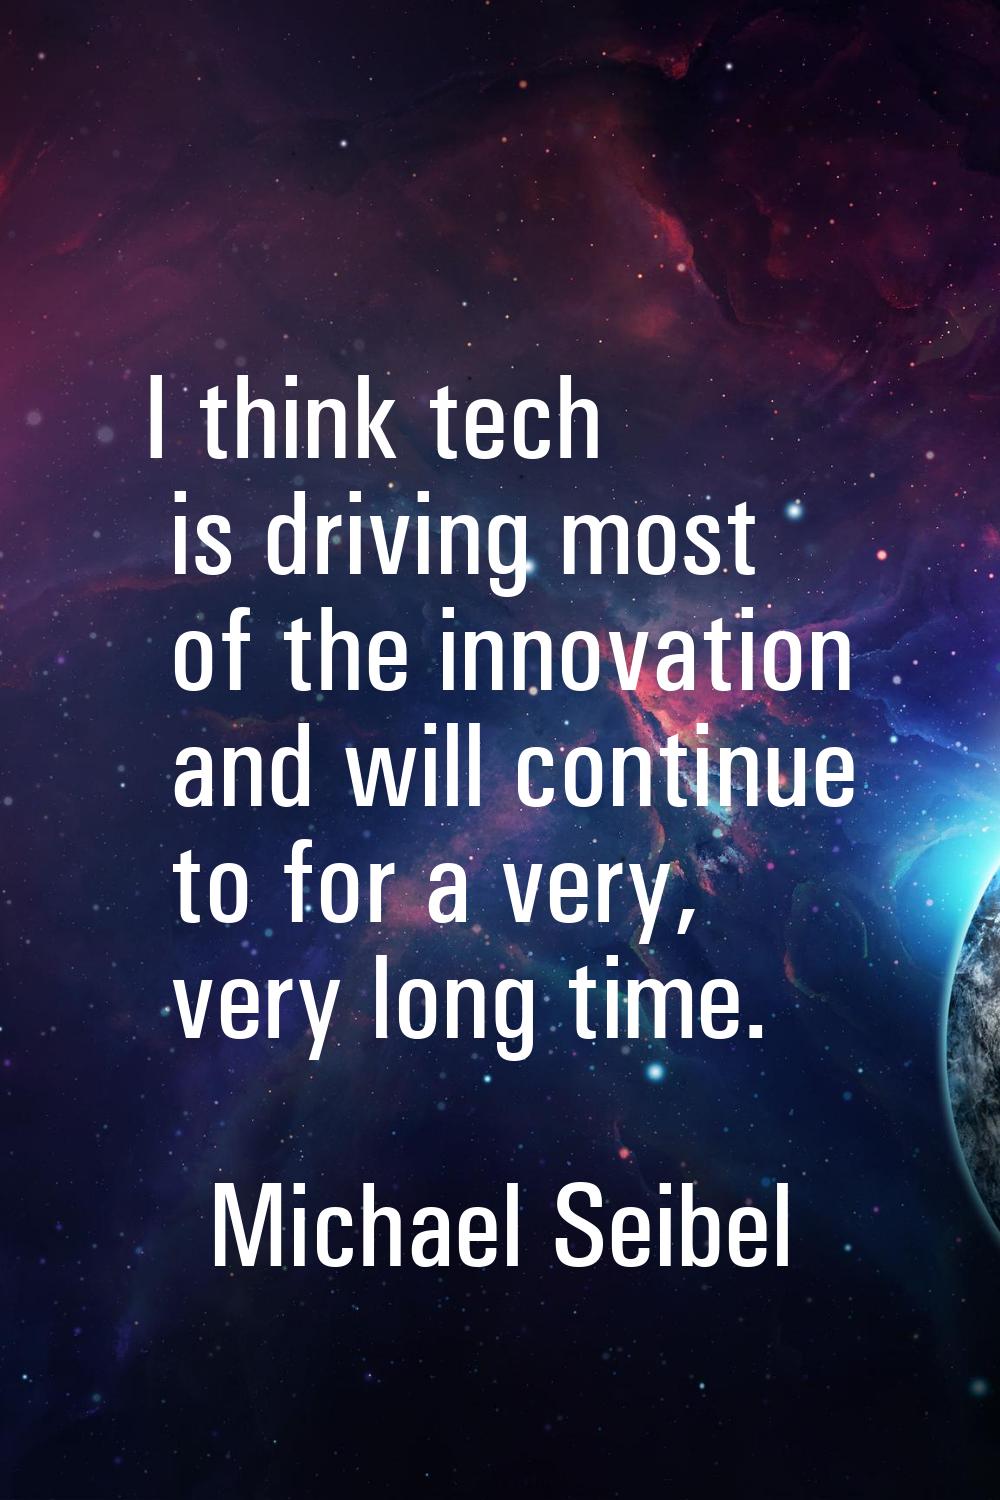 I think tech is driving most of the innovation and will continue to for a very, very long time.